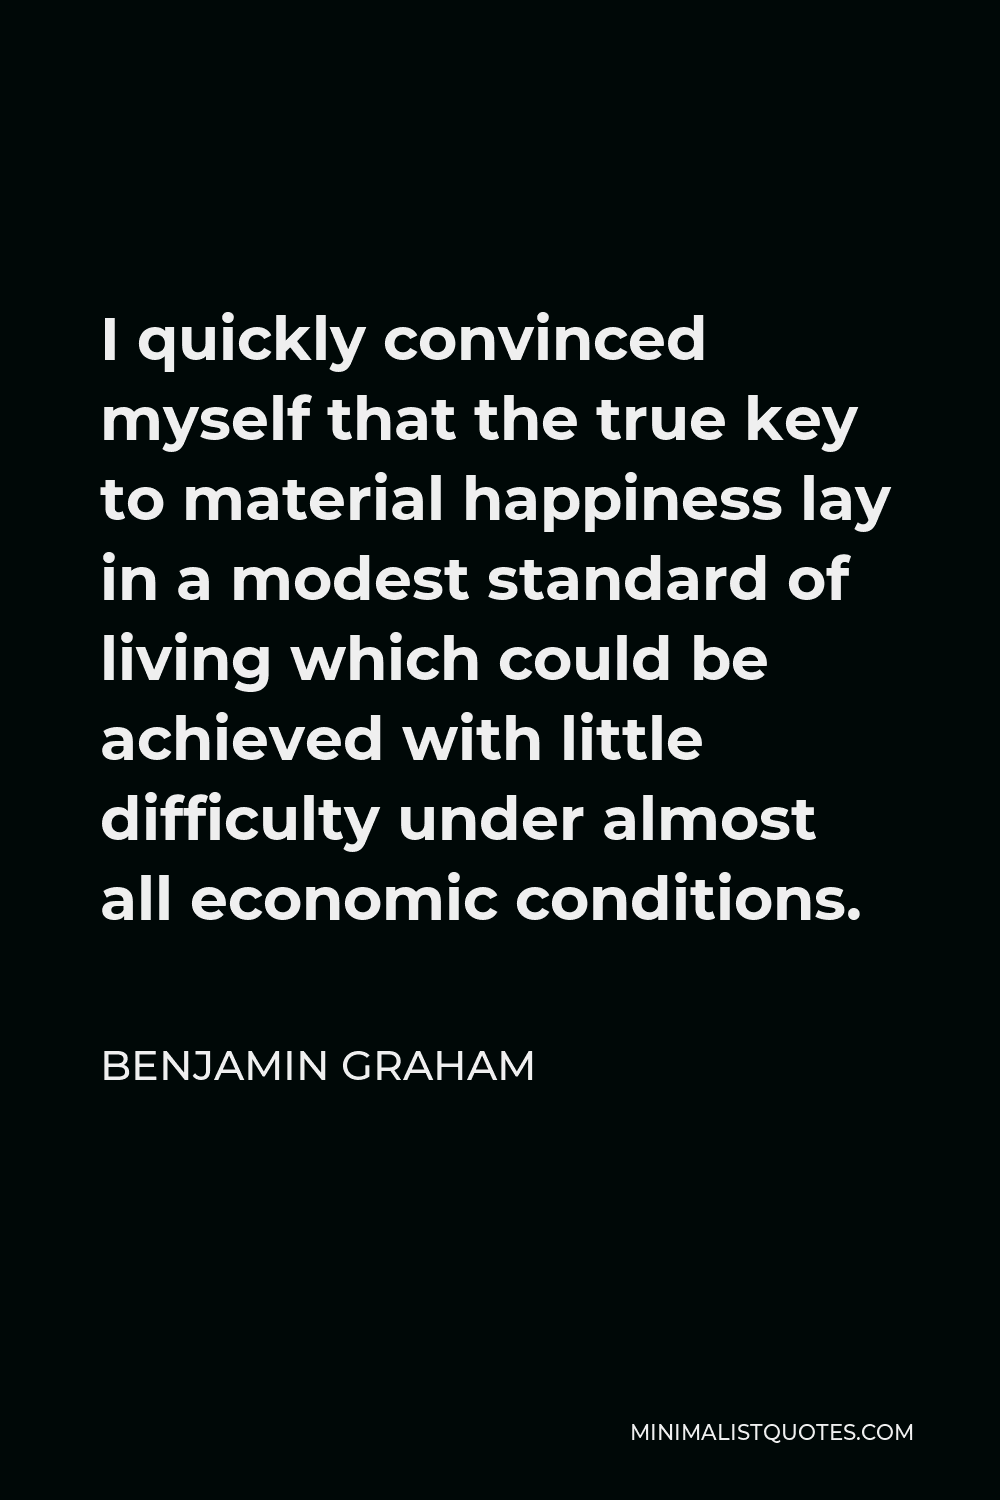 Benjamin Graham Quote - I quickly convinced myself that the true key to material happiness lay in a modest standard of living which could be achieved with little difficulty under almost all economic conditions.